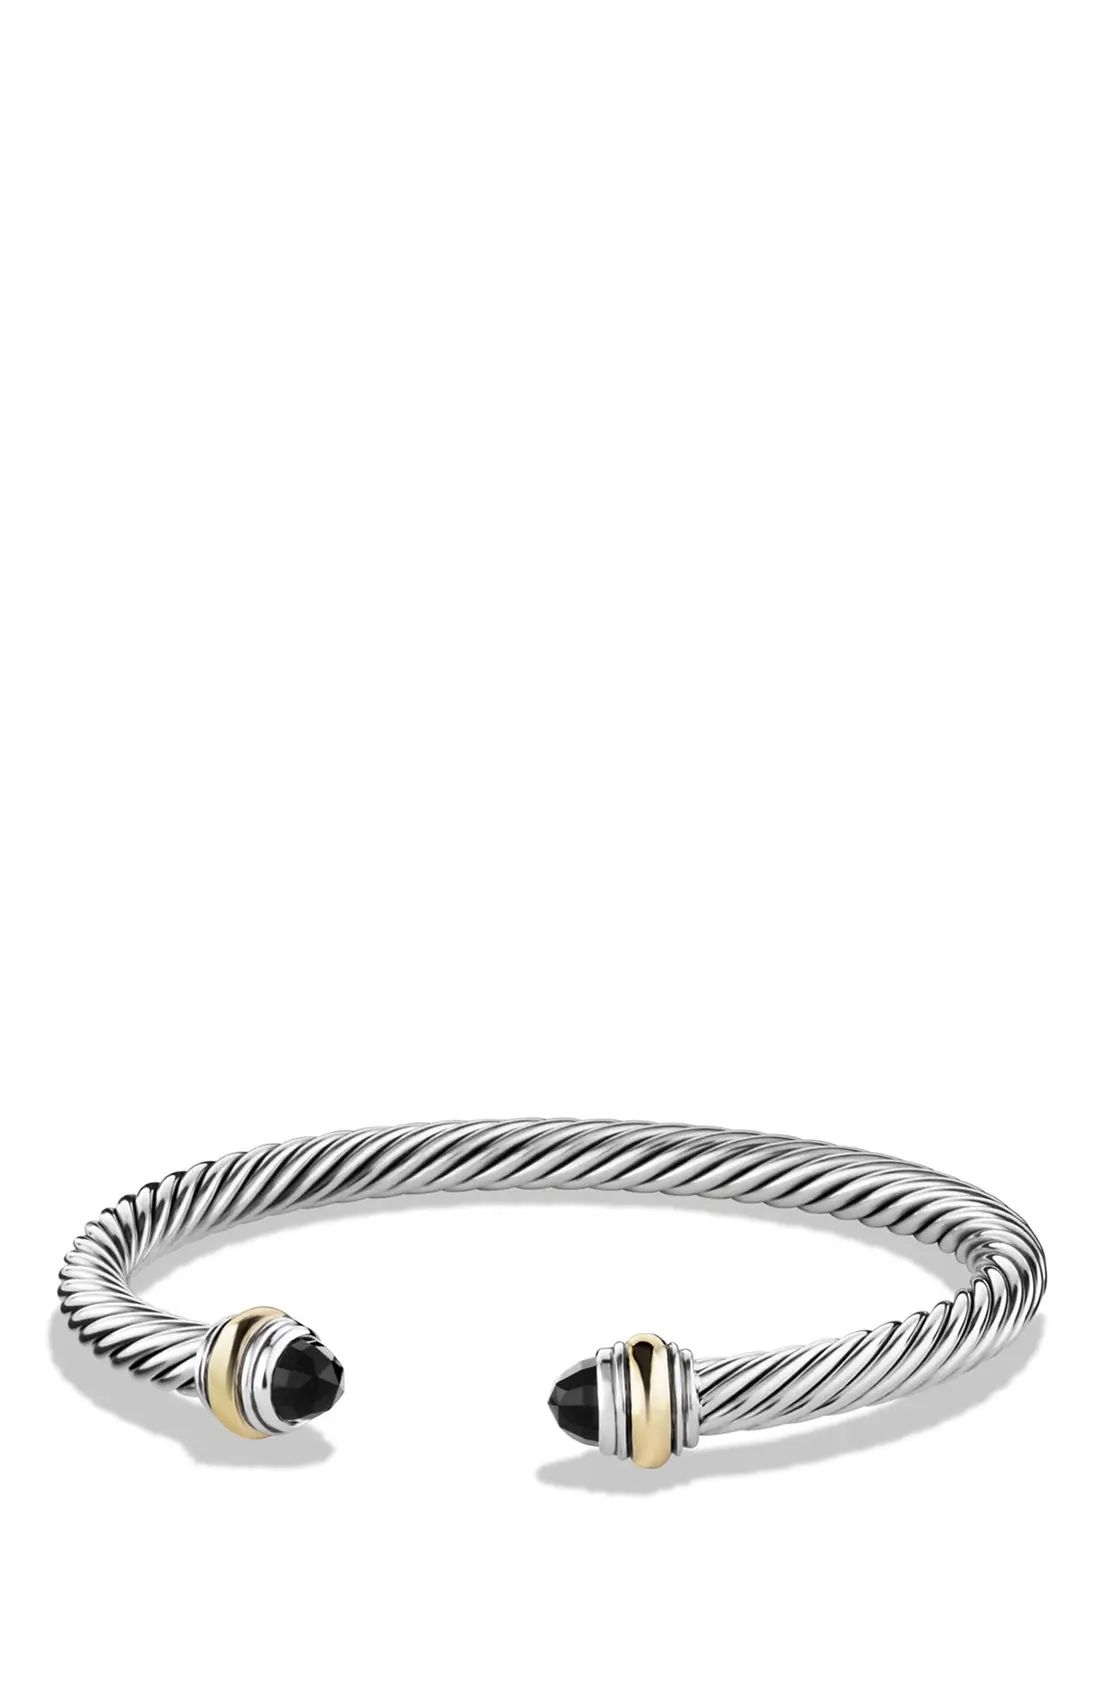 Cable Classics Bracelet with Semiprecious Stones & 14K Gold Accent, 5mm | Nordstrom